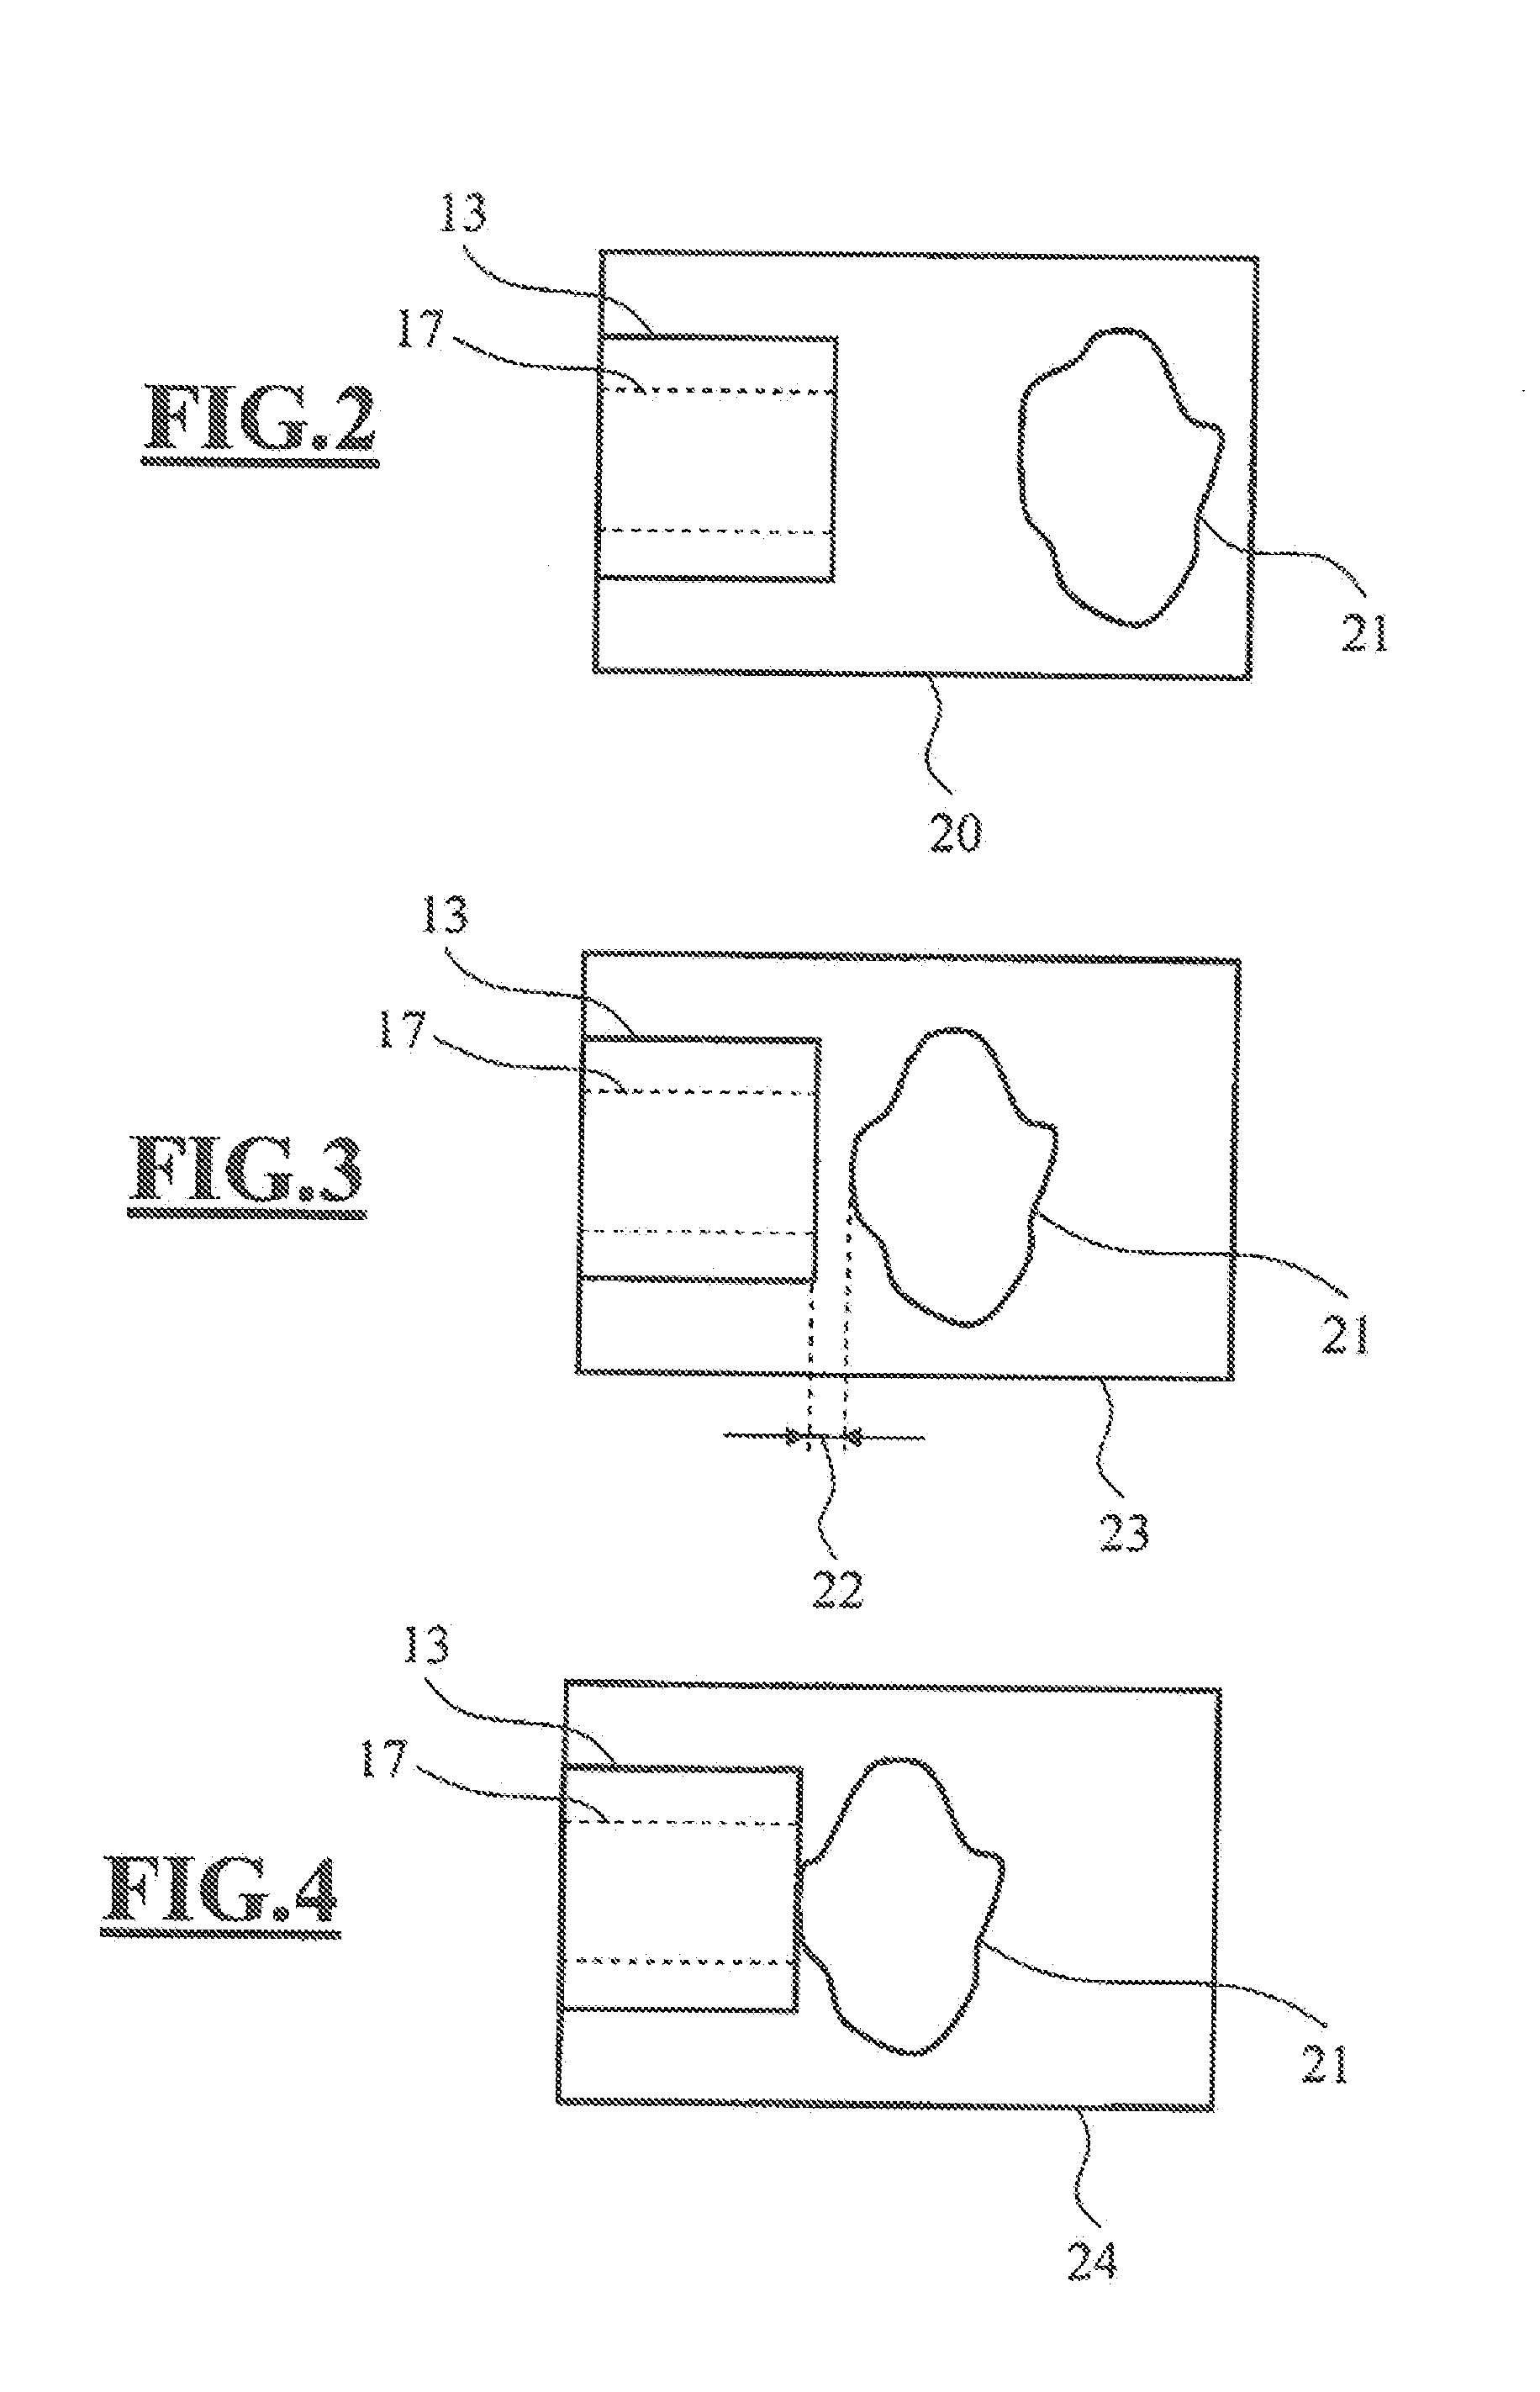 Ophthalmic surgical system and control arrangement therefor